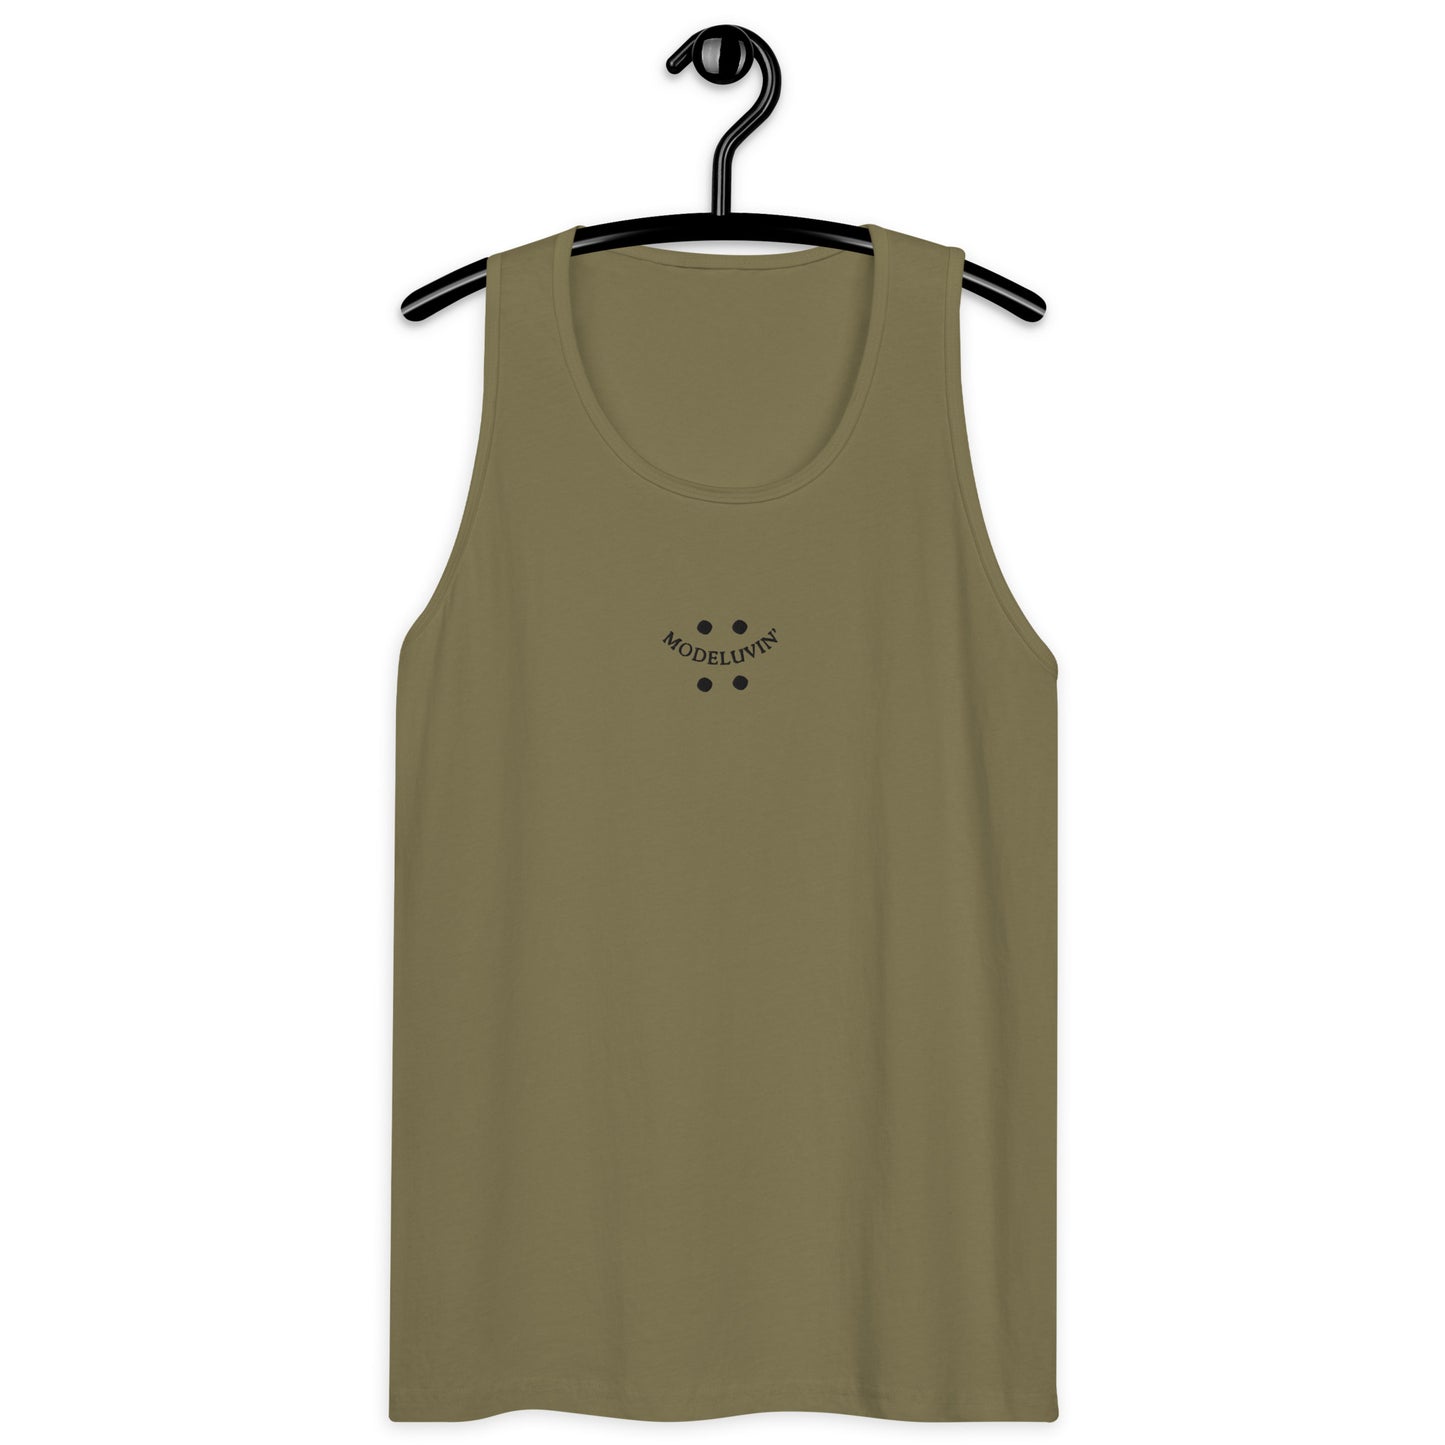 Modeluvin's Premium to the G Gym, Unisex, Tank Top, Smiley Face design Szn 2